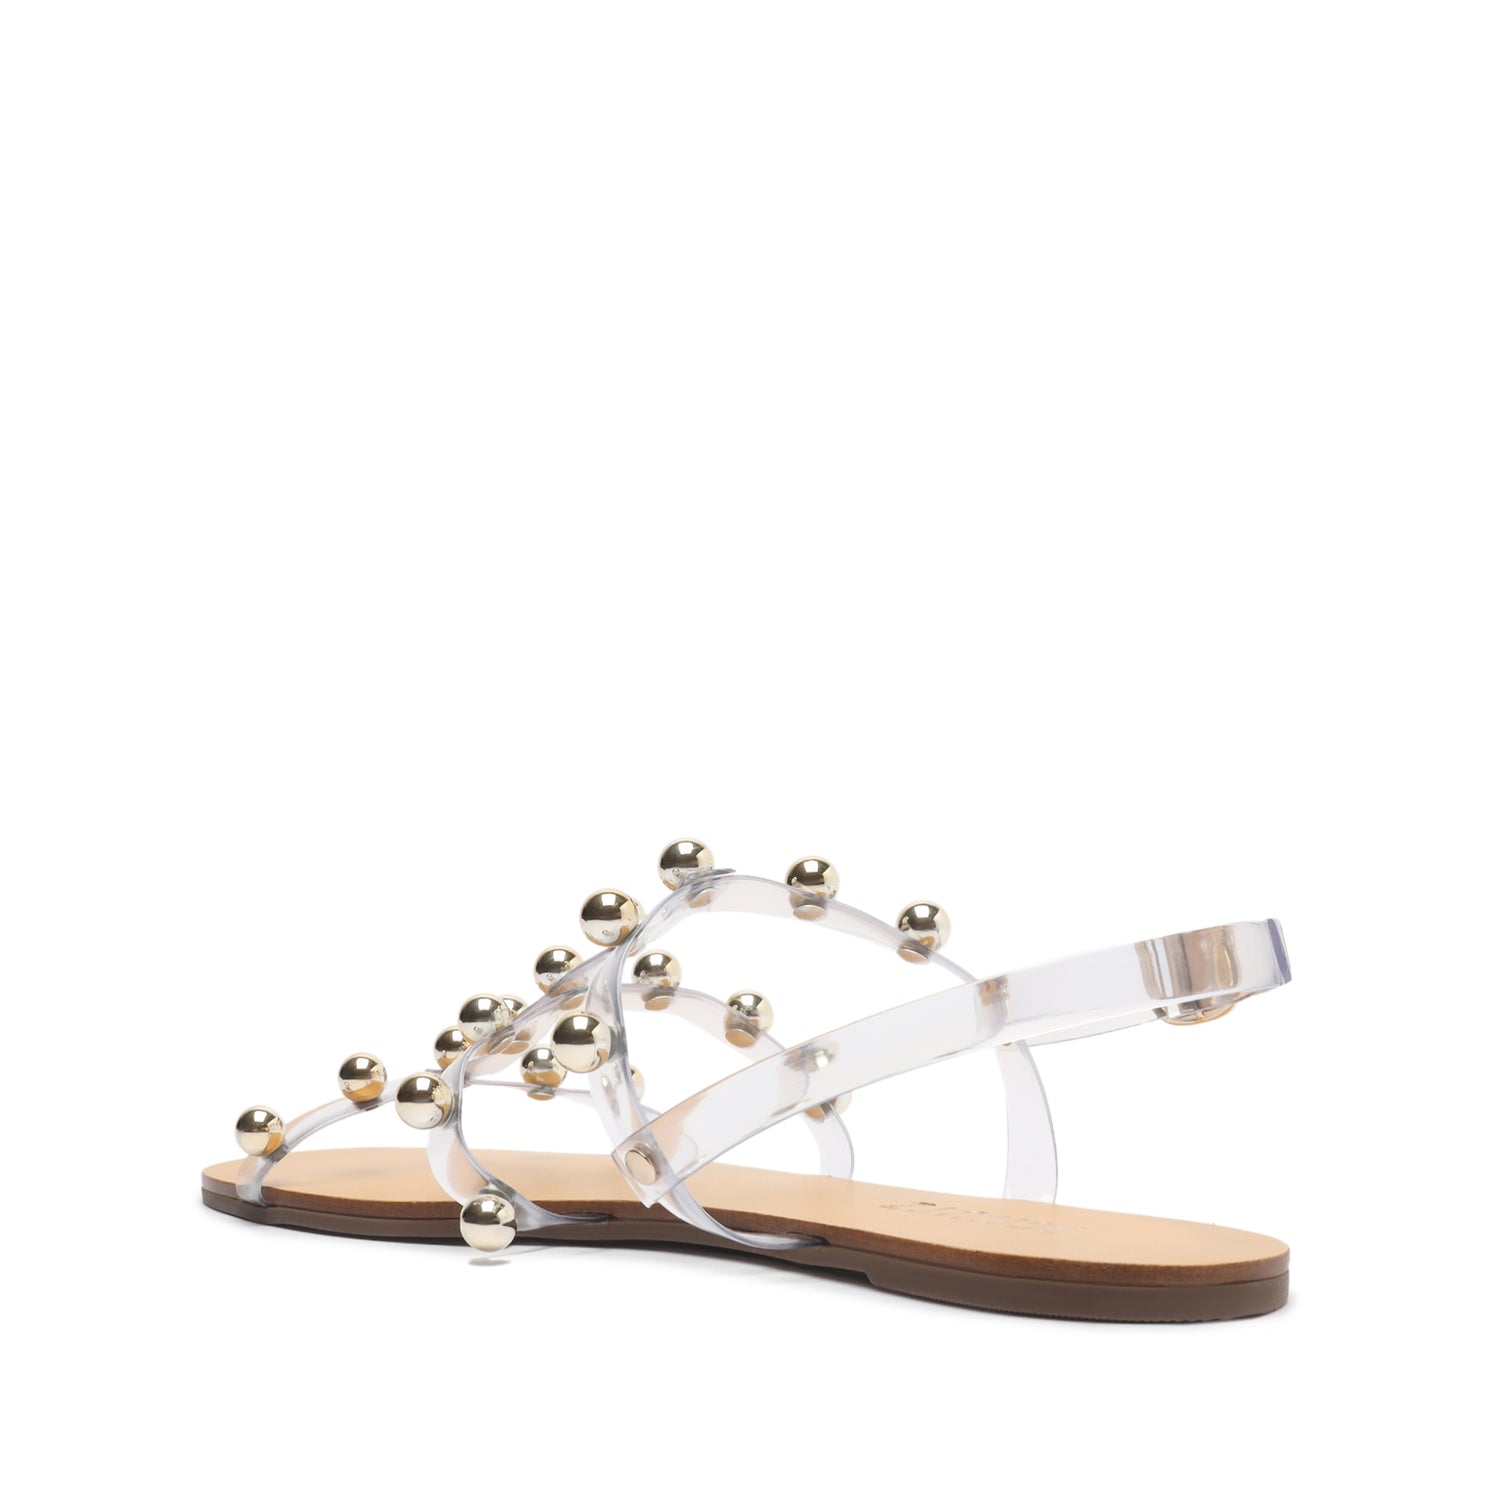 Alexandre Birman Clarita Jelly Knotted Flat Sandals on SALE | Saks OFF 5TH  | Sandals for sale, Flat sandals, Sandals